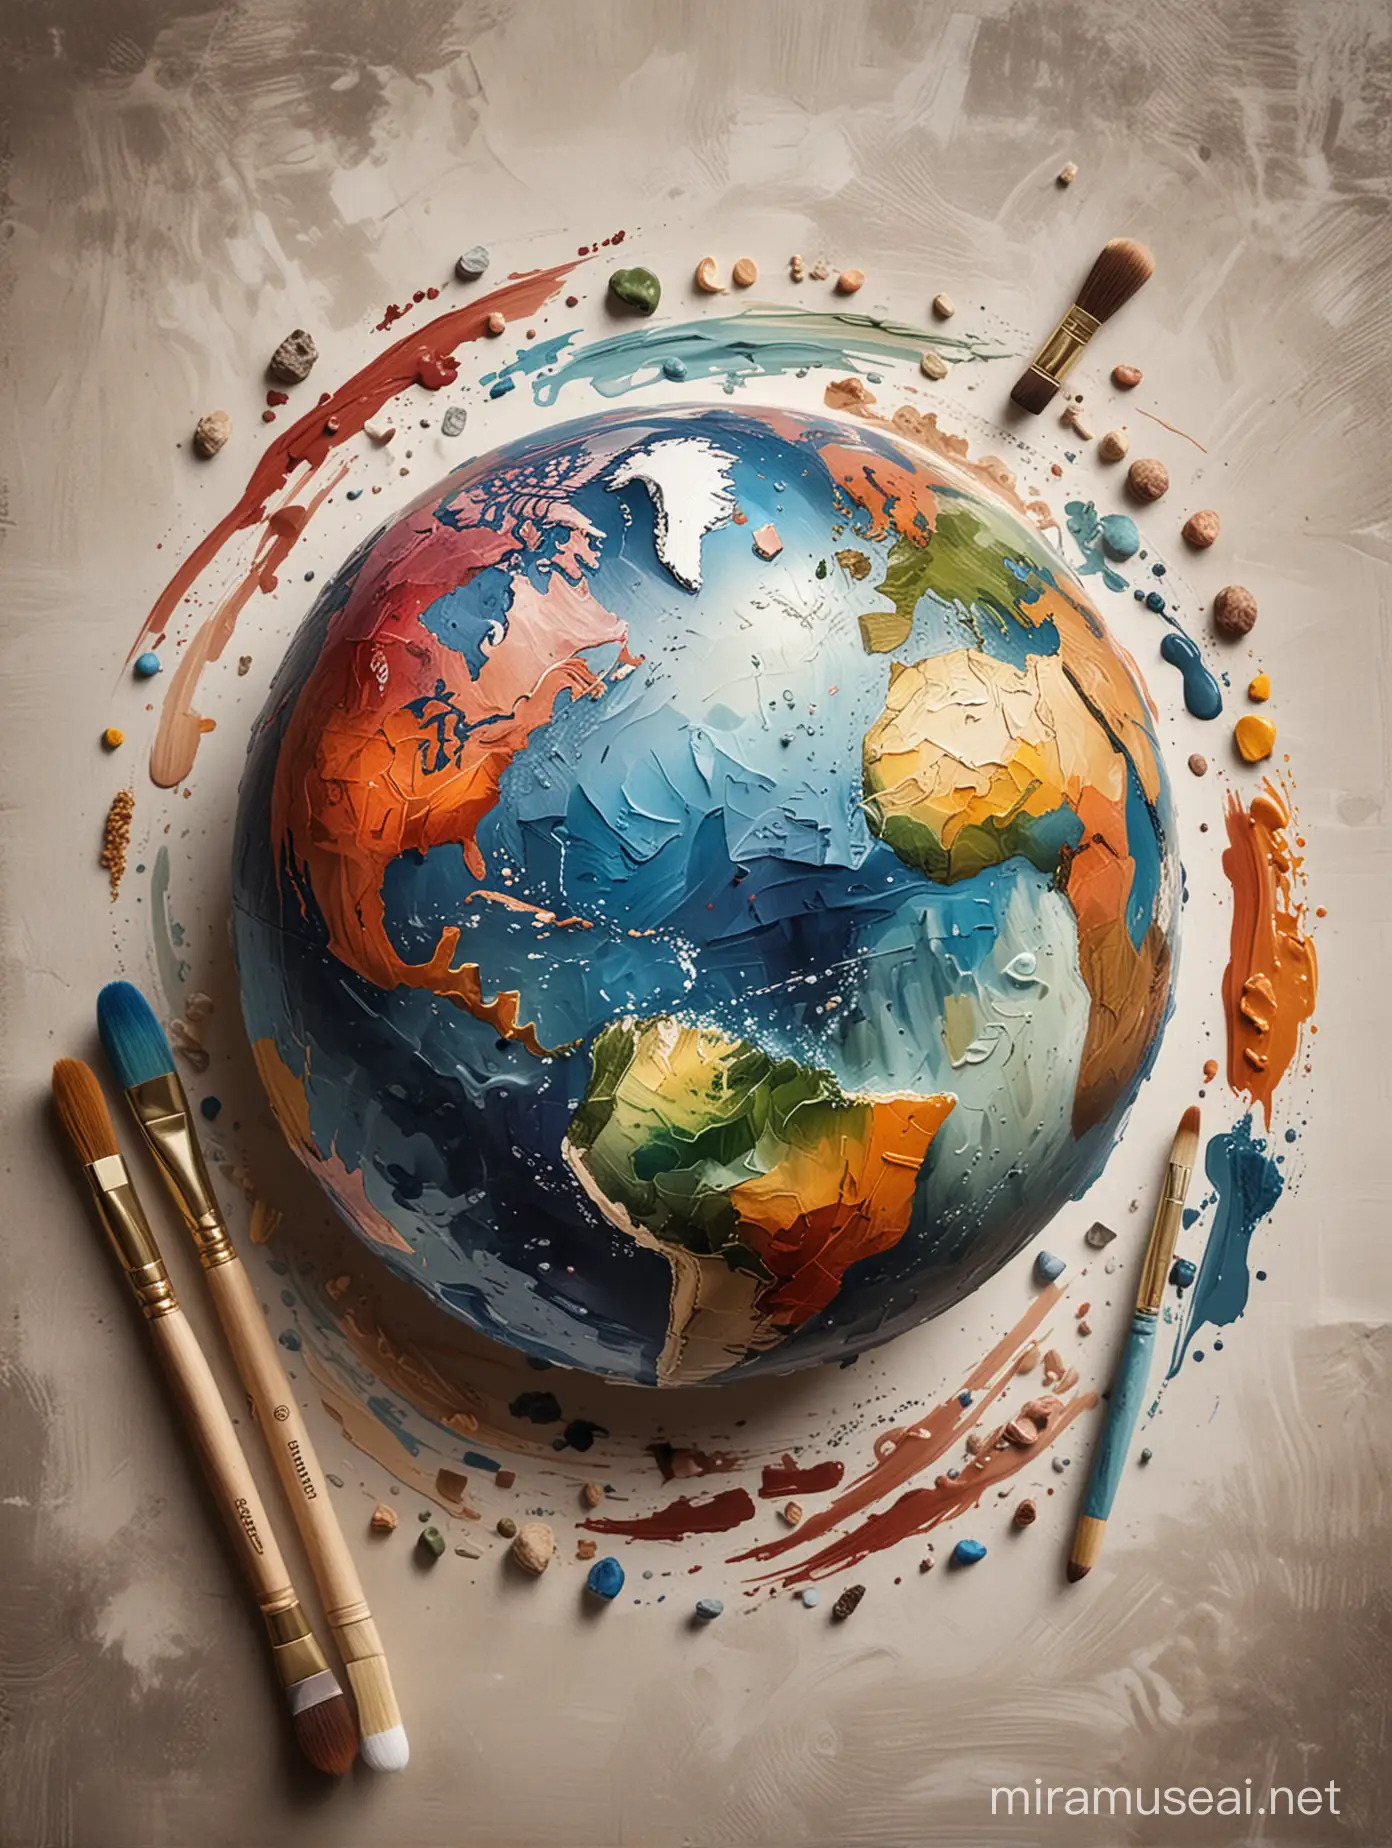 A hand-painted earth with elements of art like paints brushes, palette etc around it